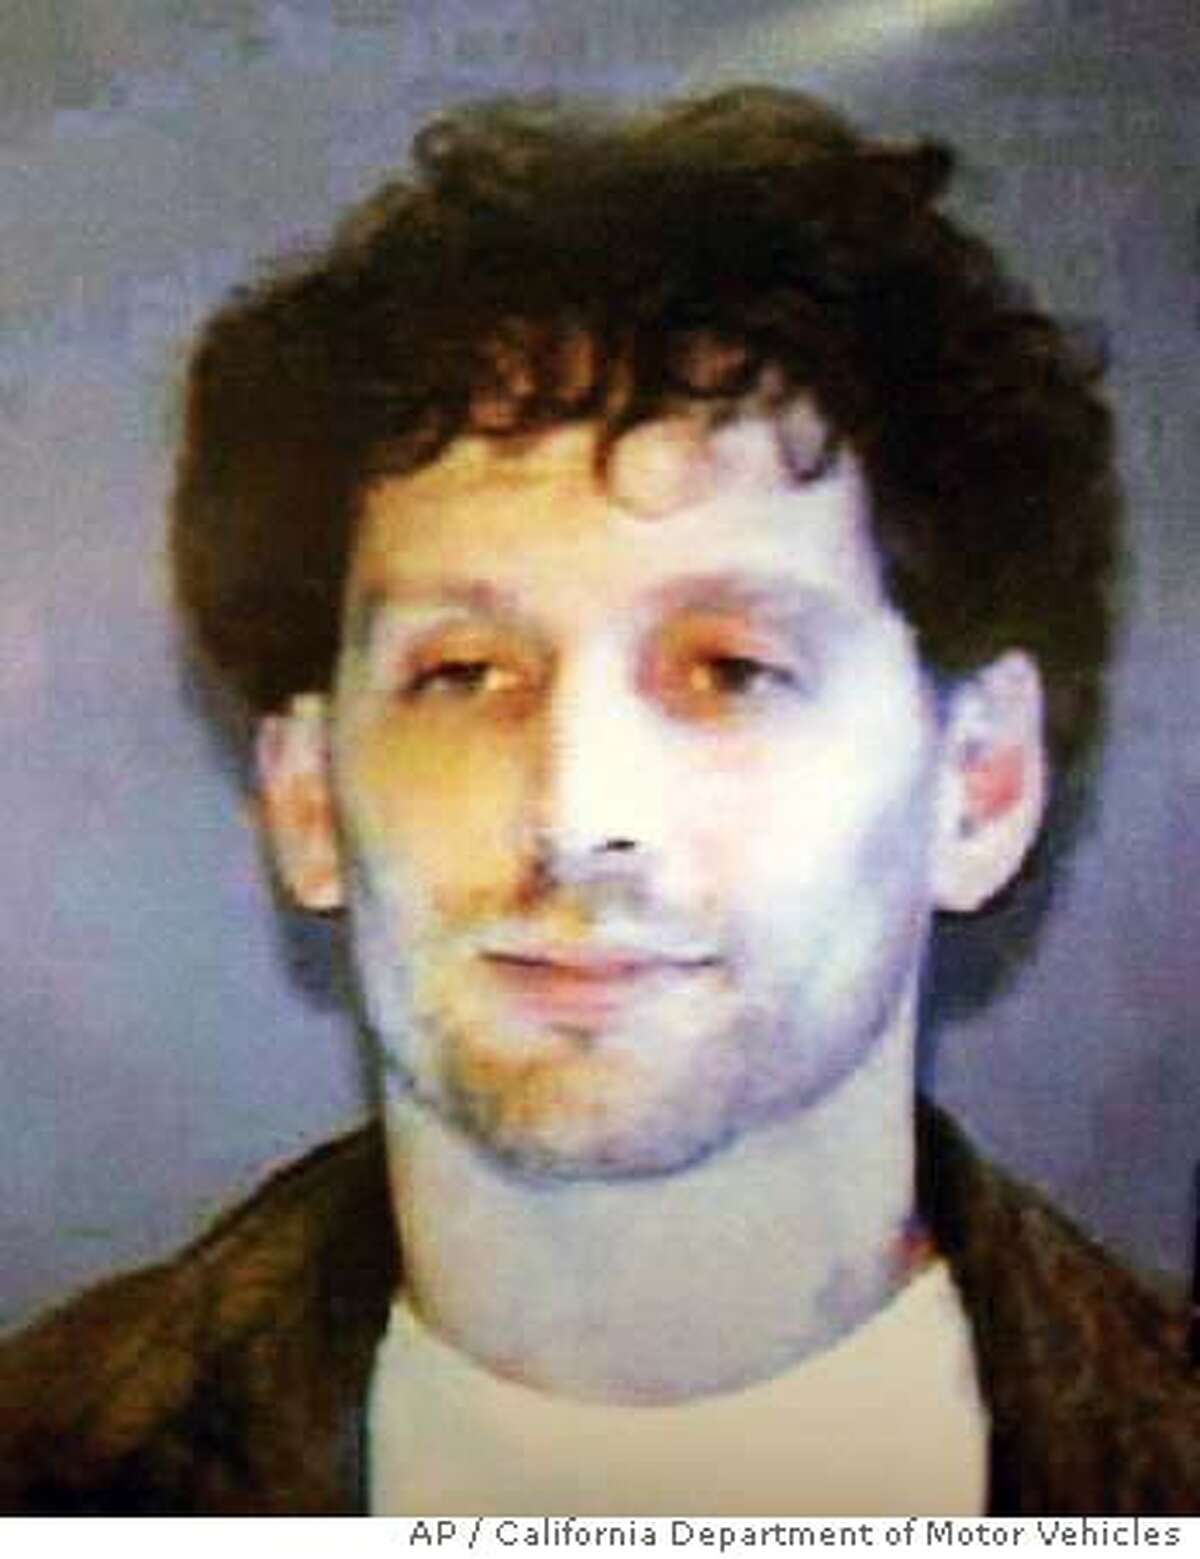 In this 1998 photo released by the California Department of Motor Vehicles, Hans Thomas Reiser is shown. Hans Thomas Reiser was arrested Tuesday, Oct. 10, 2006, on suspicion of killing his missing wife more than a month ago, police said. Reiser was arrested one day after Oakland police, with the help of the FBI, searched his house a second time for clues in the disappearance of Nina Reiser, 31, who was last seen Sept. 3 while dropping off her 7-year-old son and 5-year-old daughter at her husband's home in the Oakland hills. (AP Photo/California Department of Motor Vehicles via The Oakland Tribune) Ran on: 10-13-2006 Hans Reiser Ran on: 10-13-2006 Hans Reiser Ran on: 10-13-2006 Hans Reiser Ran on: 10-13-2006 Hans Reiser Ran on: 10-13-2006 Hans Reiser LOCALS PLEASE CREDIT, MAGS OUT, BEST QUALITY AVAILABLE